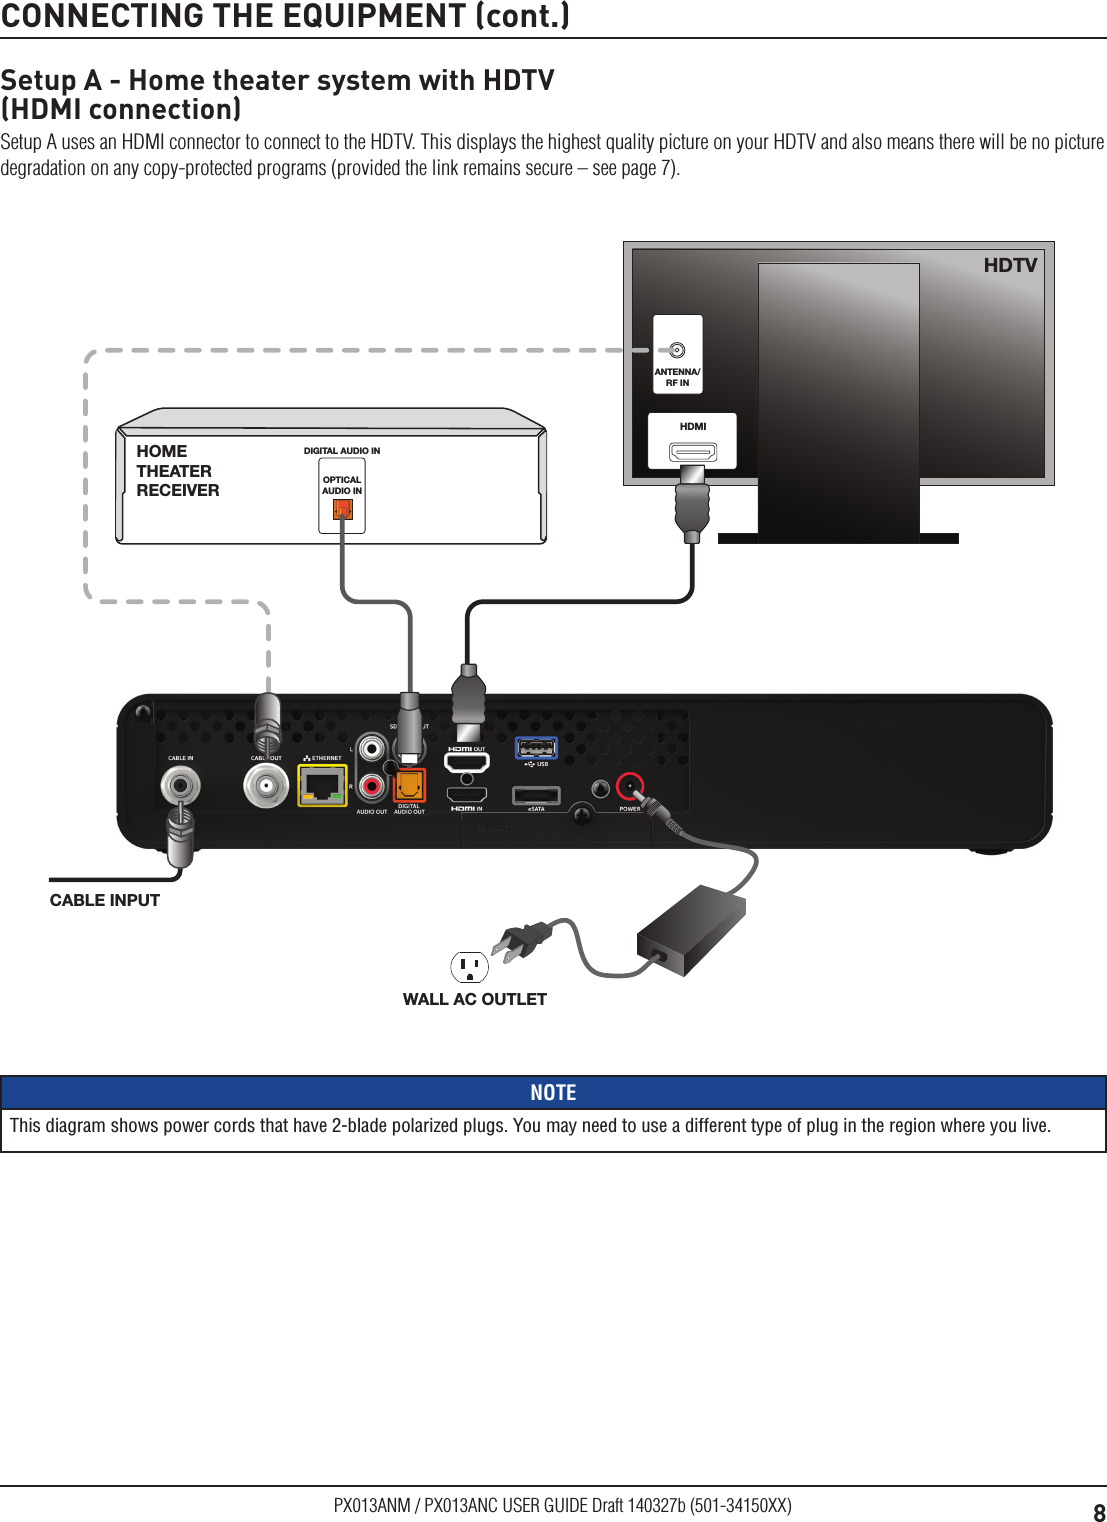 8PX013ANM / PX013ANC USER GUIDE Draft 140327b (501-34150XX)CONNECTING THE EQUIPMENT (cont.)Setup A - Home theater system with HDTV  (HDMI connection)Setup A uses an HDMI connector to connect to the HDTV. This displays the highest quality picture on your HDTV and also means there will be no picture degradation on any copy-protected programs (provided the link remains secure – see page 7).OPTICALAUDIO INDIGITAL AUDIO INHOME THEATER RECEIVERANTENNA/RF INHDMIHDTVCABLE INPUTWALL AC OUTLETNOTEThis diagram shows power cords that have 2-blade polarized plugs. You may need to use a different type of plug in the region where you live.